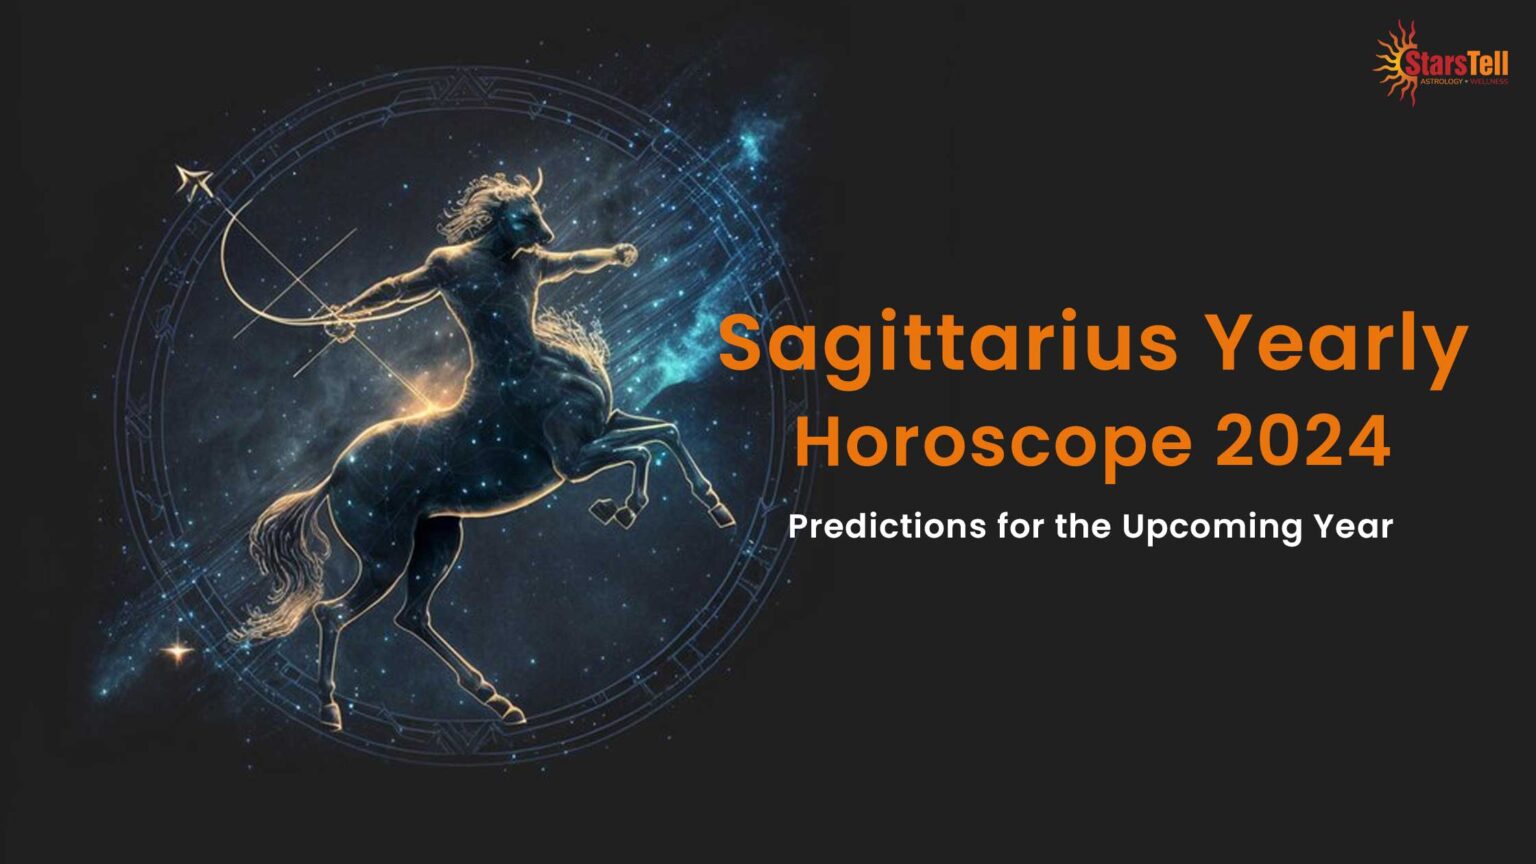 Sagittarius Yearly Horoscope 2024 Predictions for the Year Online Astrology